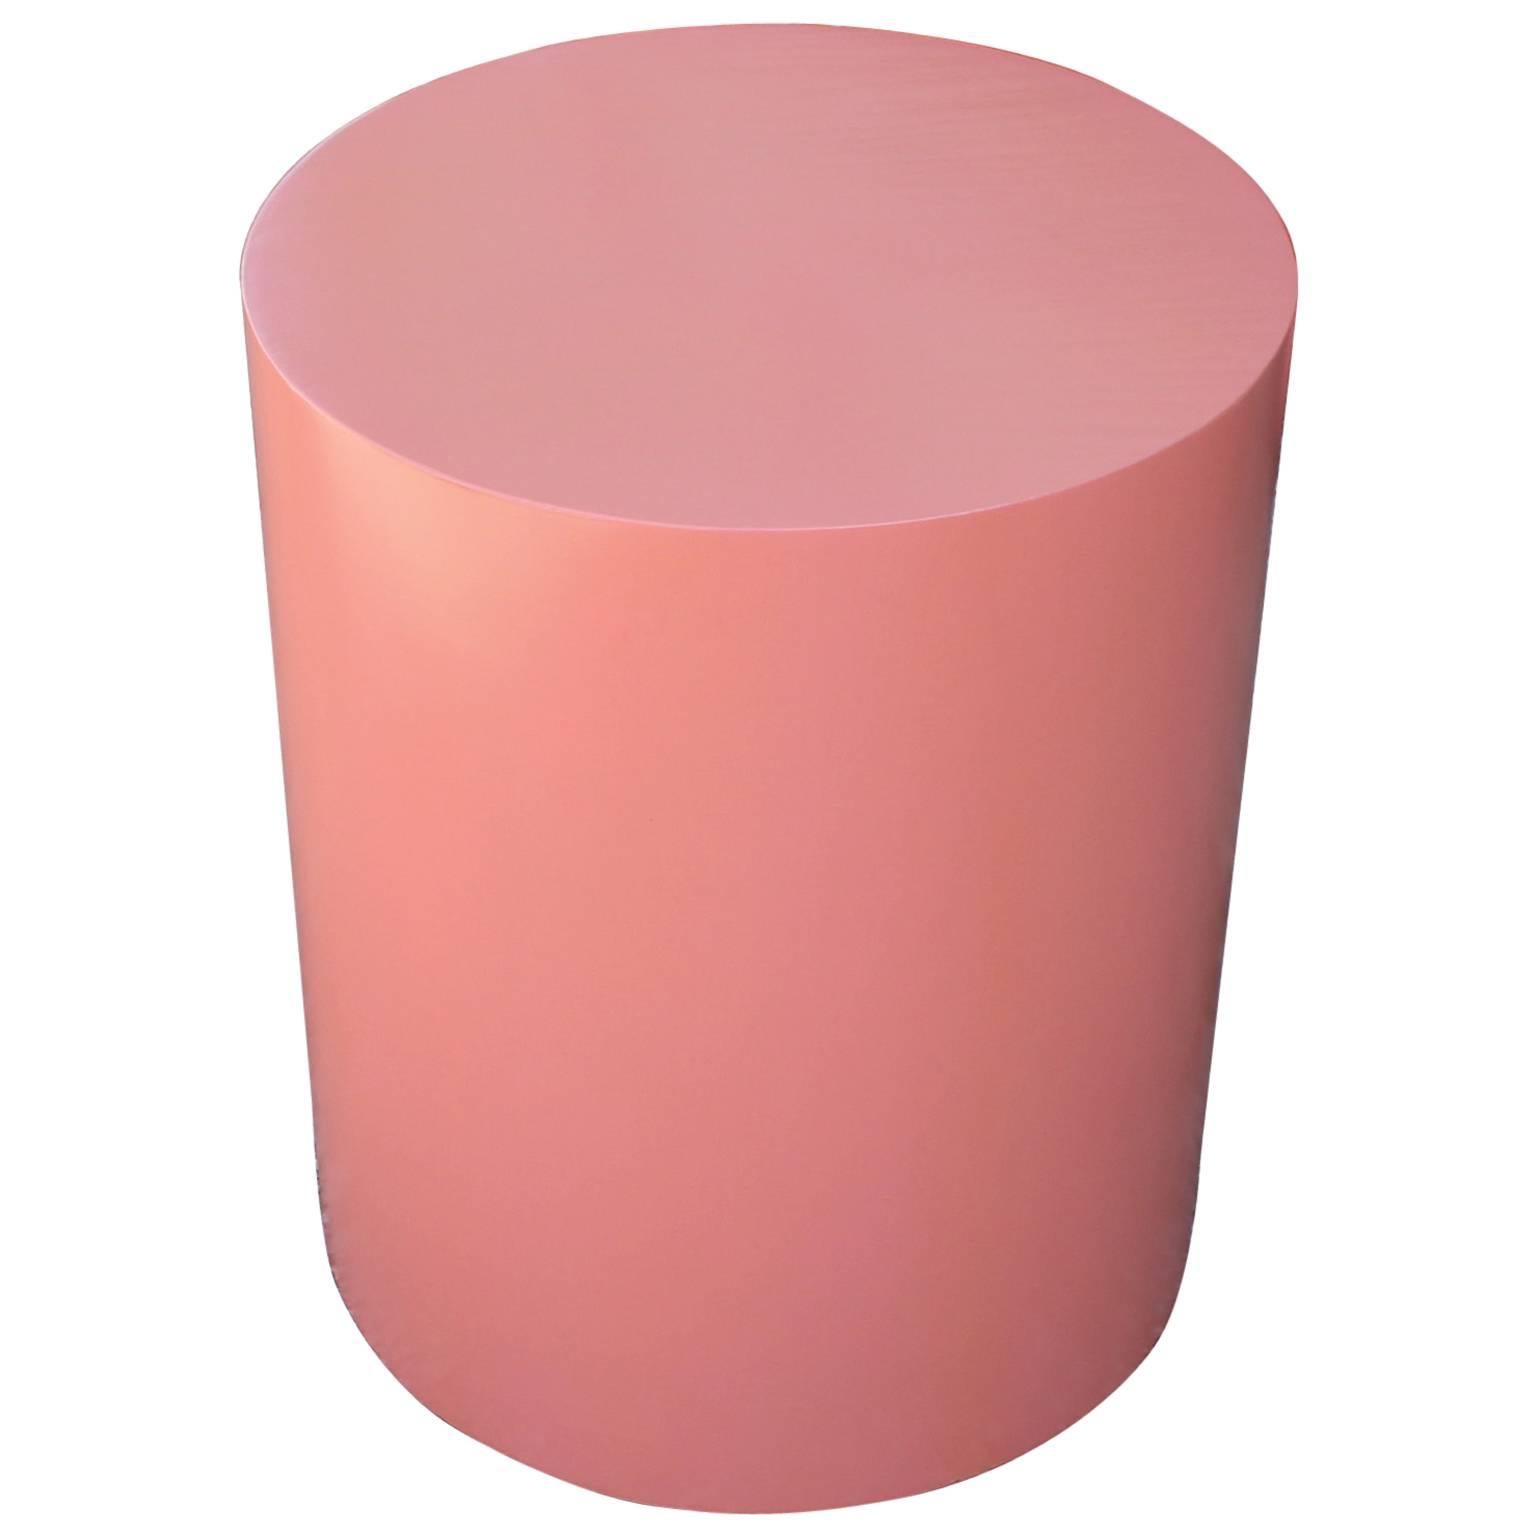 Glossy Coral Lacquered Modern Drum Side Table